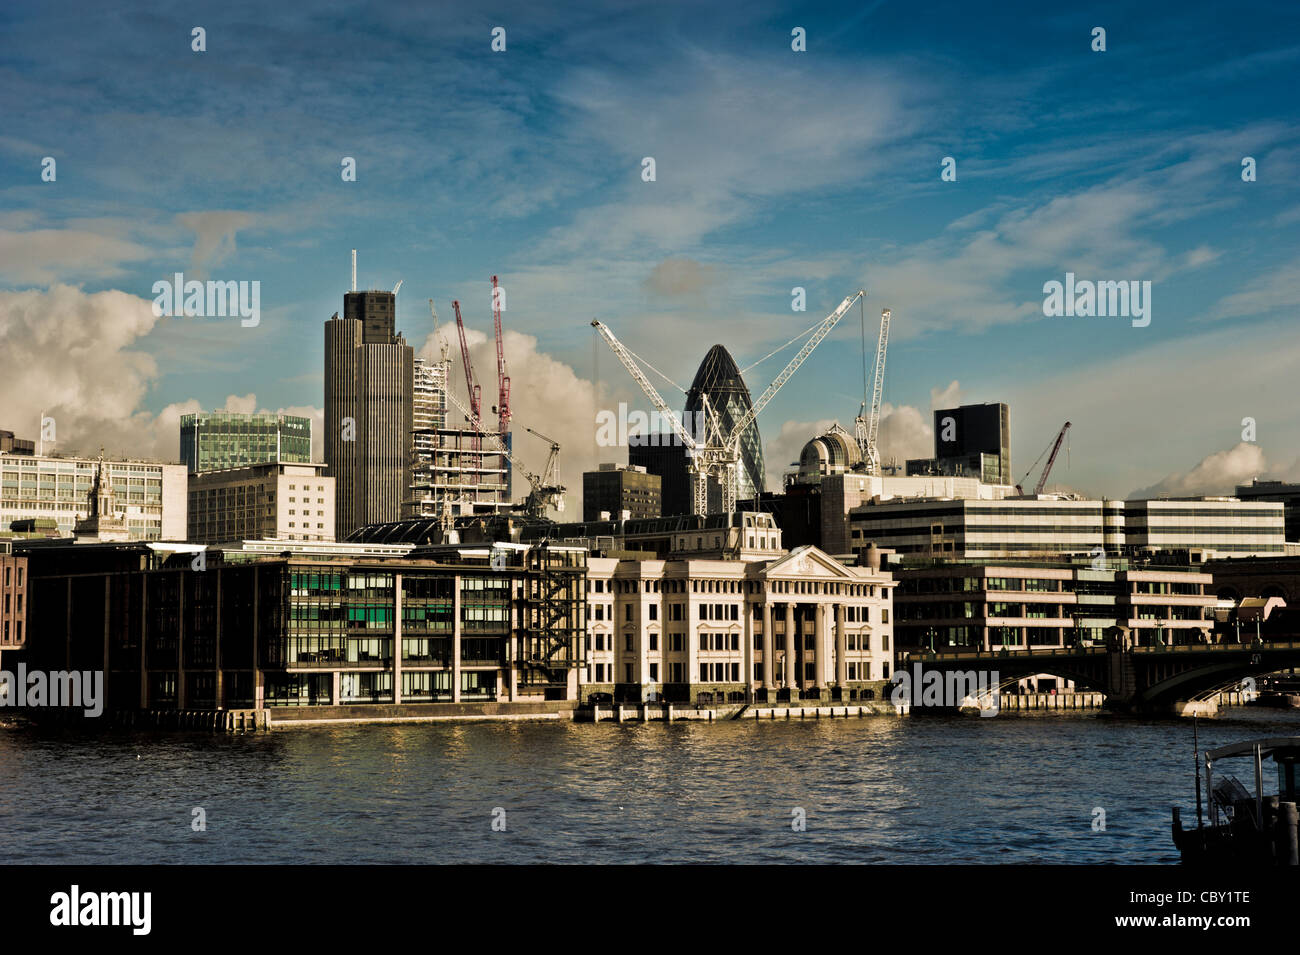 View from Tate modern towards financial district of London showing the Gherkin building and Vintners Hall. Stock Photo